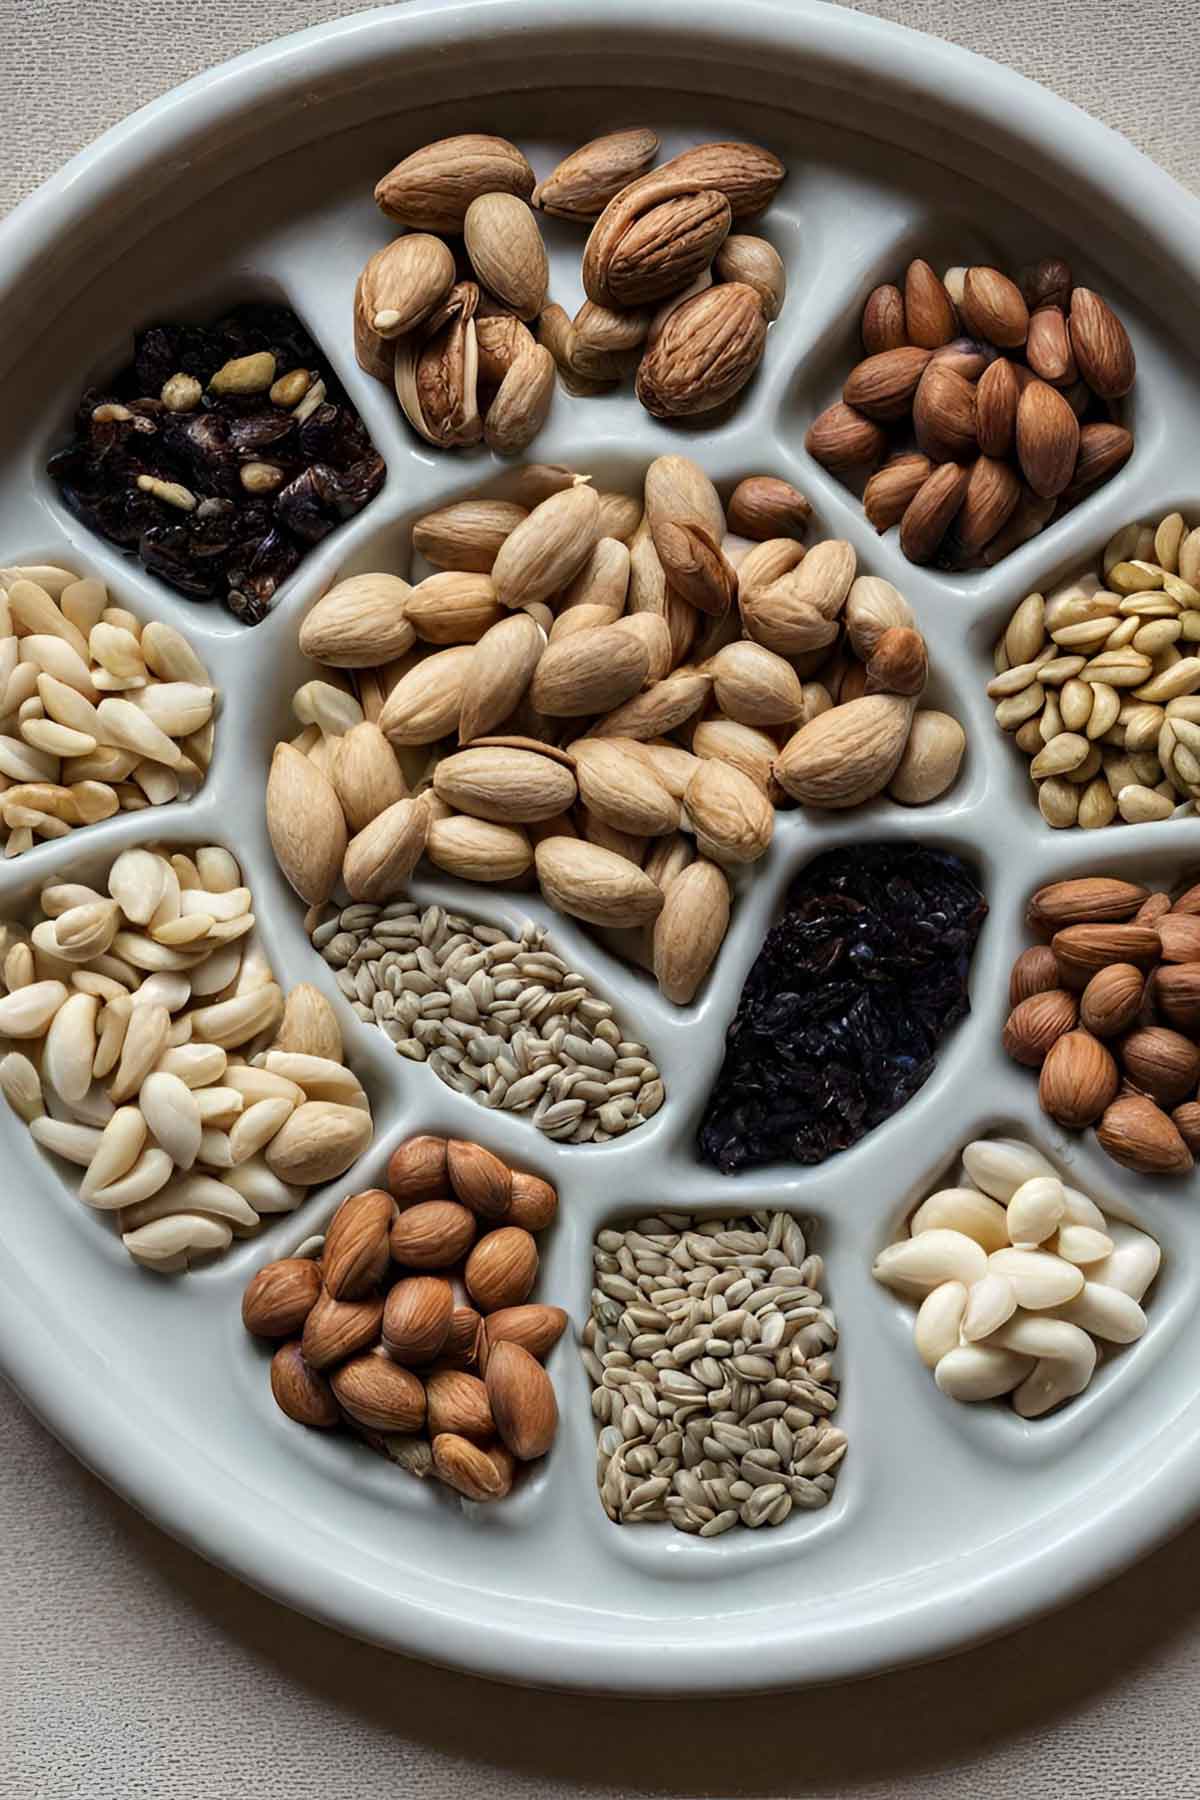 Seed and Nut Tray 10 calorie snacks clean eating version